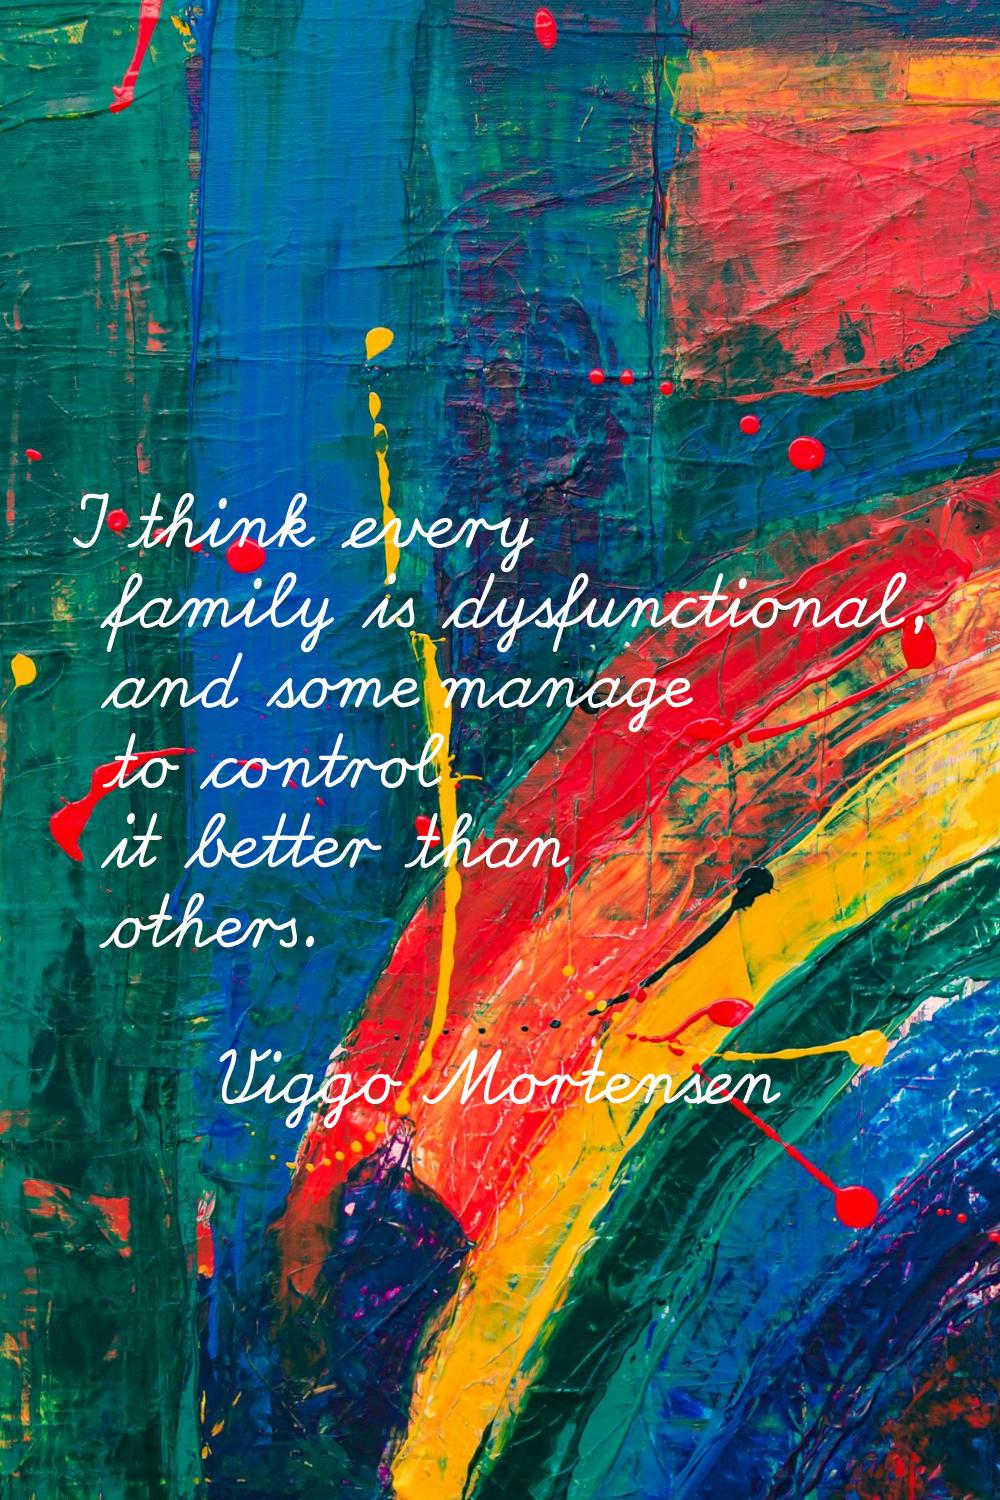 I think every family is dysfunctional, and some manage to control it better than others.